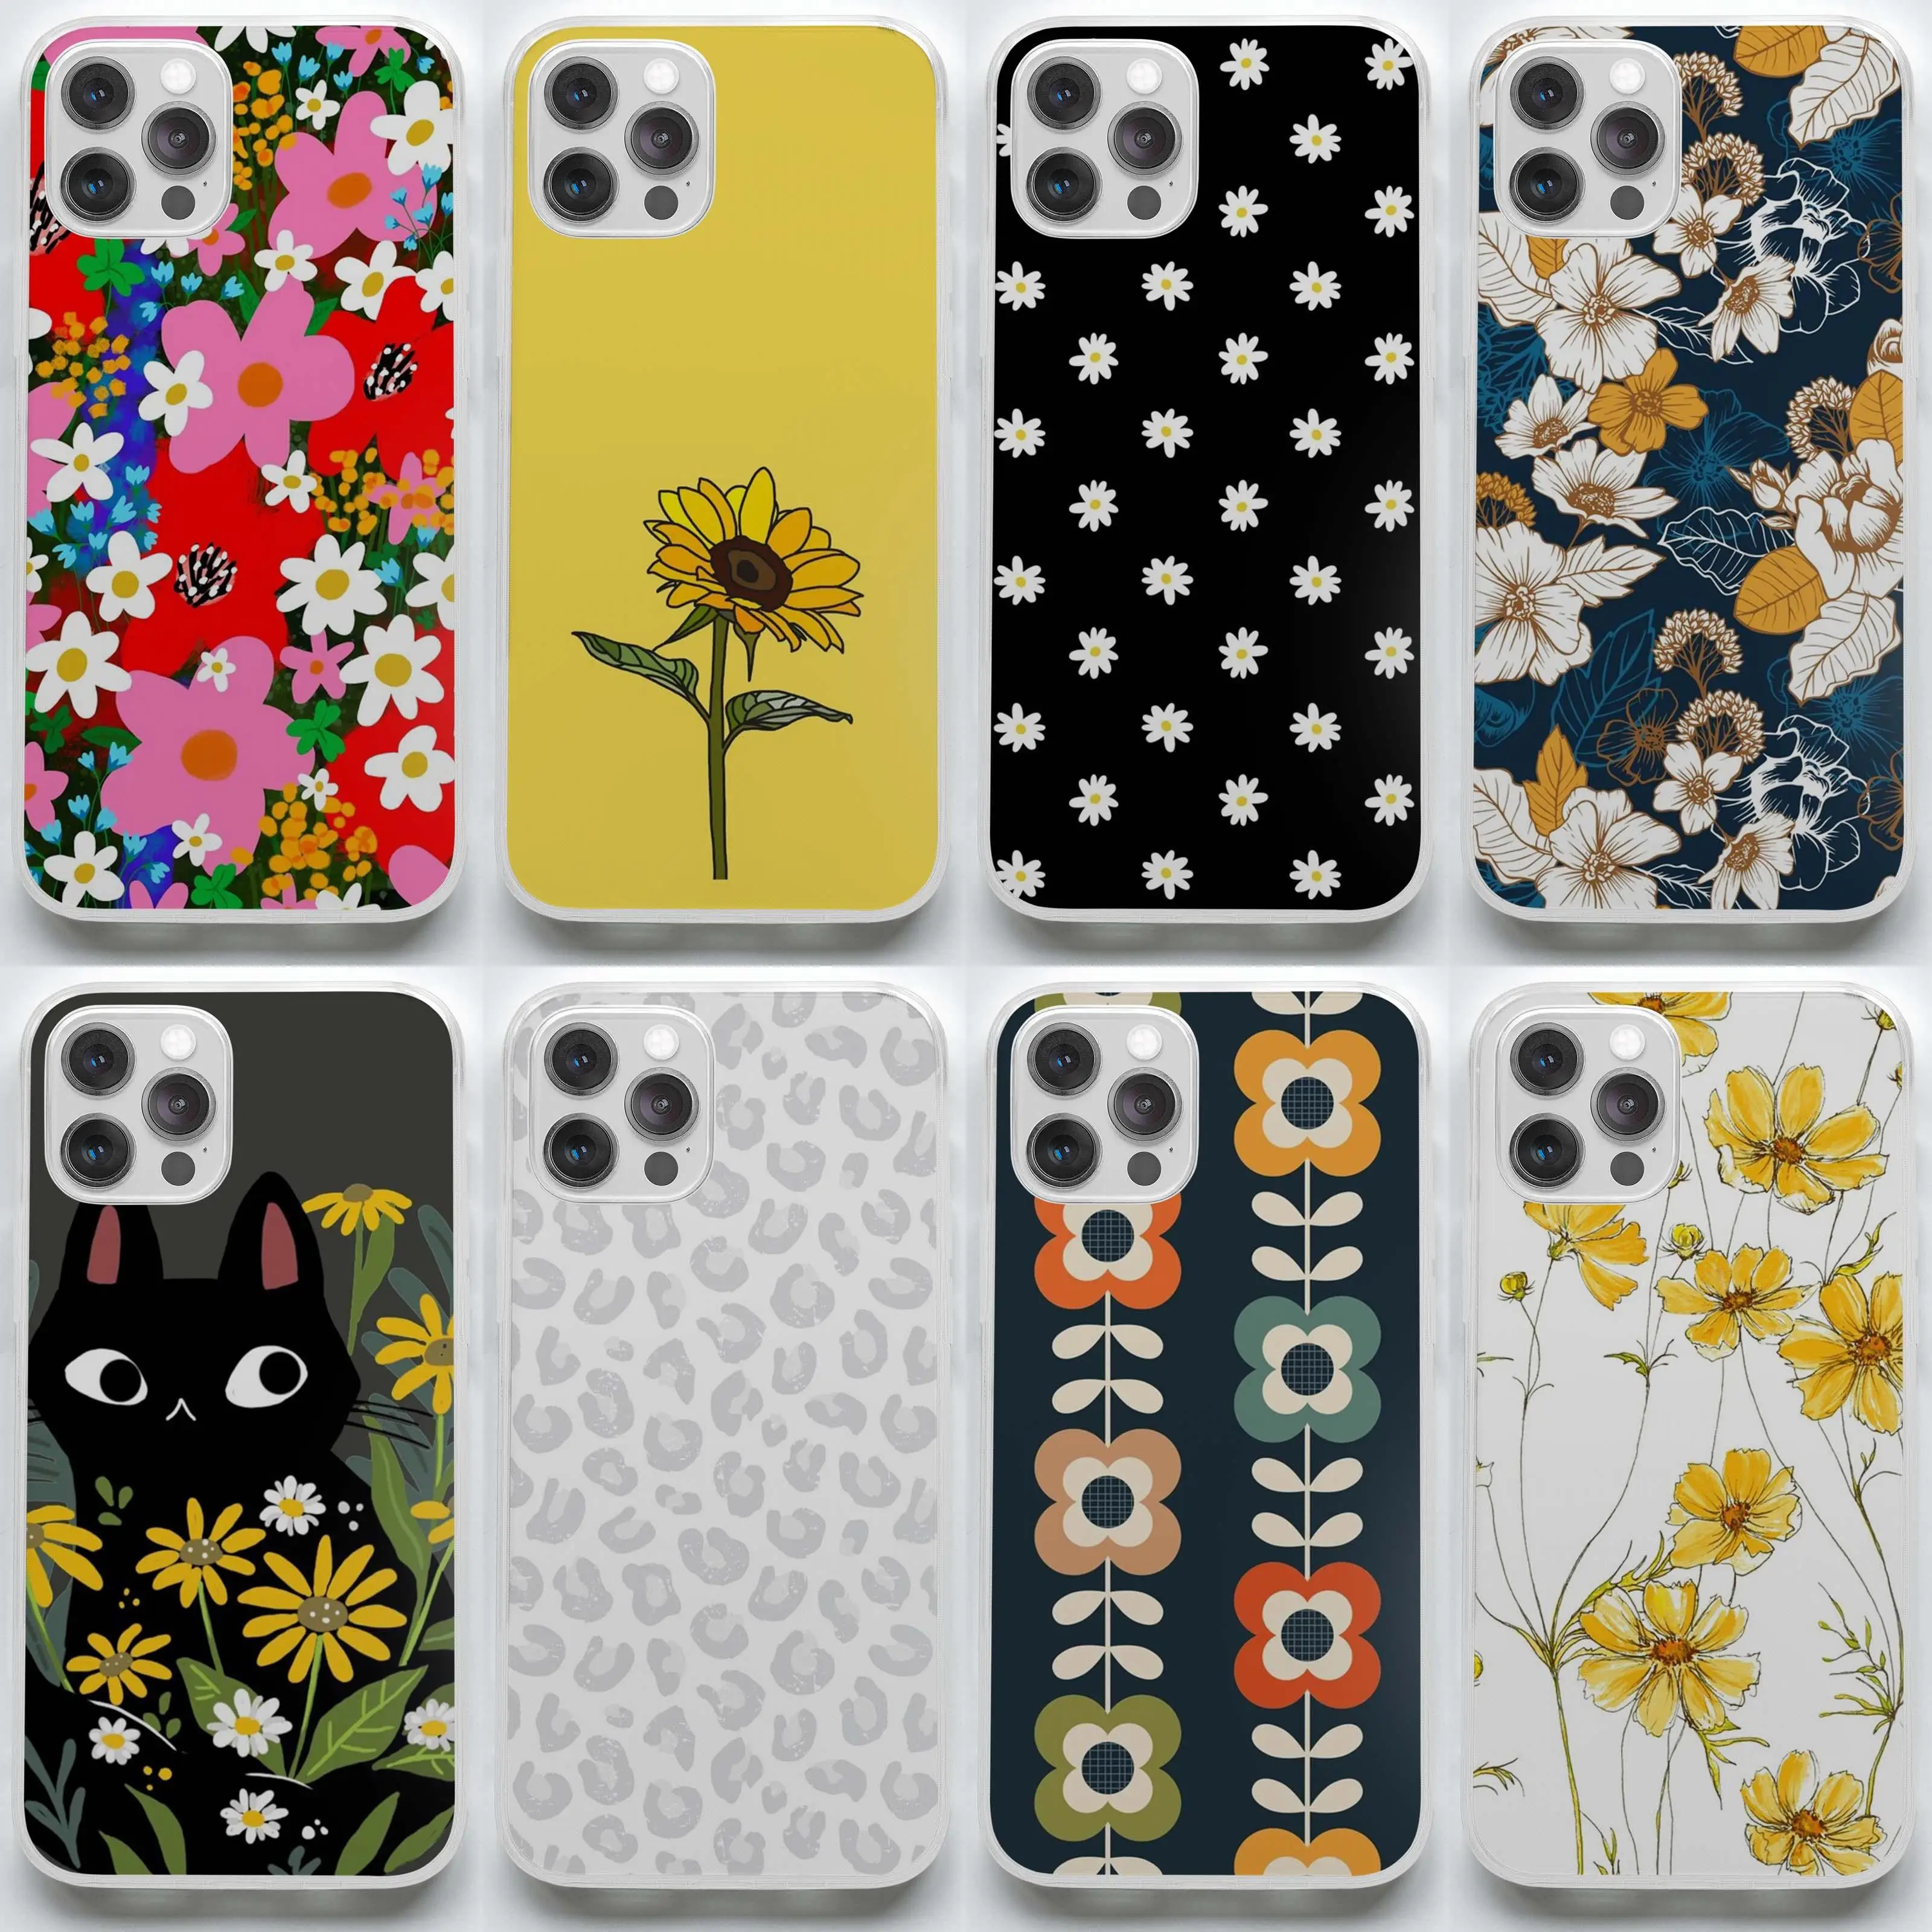 Daisies Flower Power Soft Aesthetic Sunflower Daisy Navy And Phone Case for iPhone X XS XR Max 11 12 13 Pro Max Mini 7 8 Plus